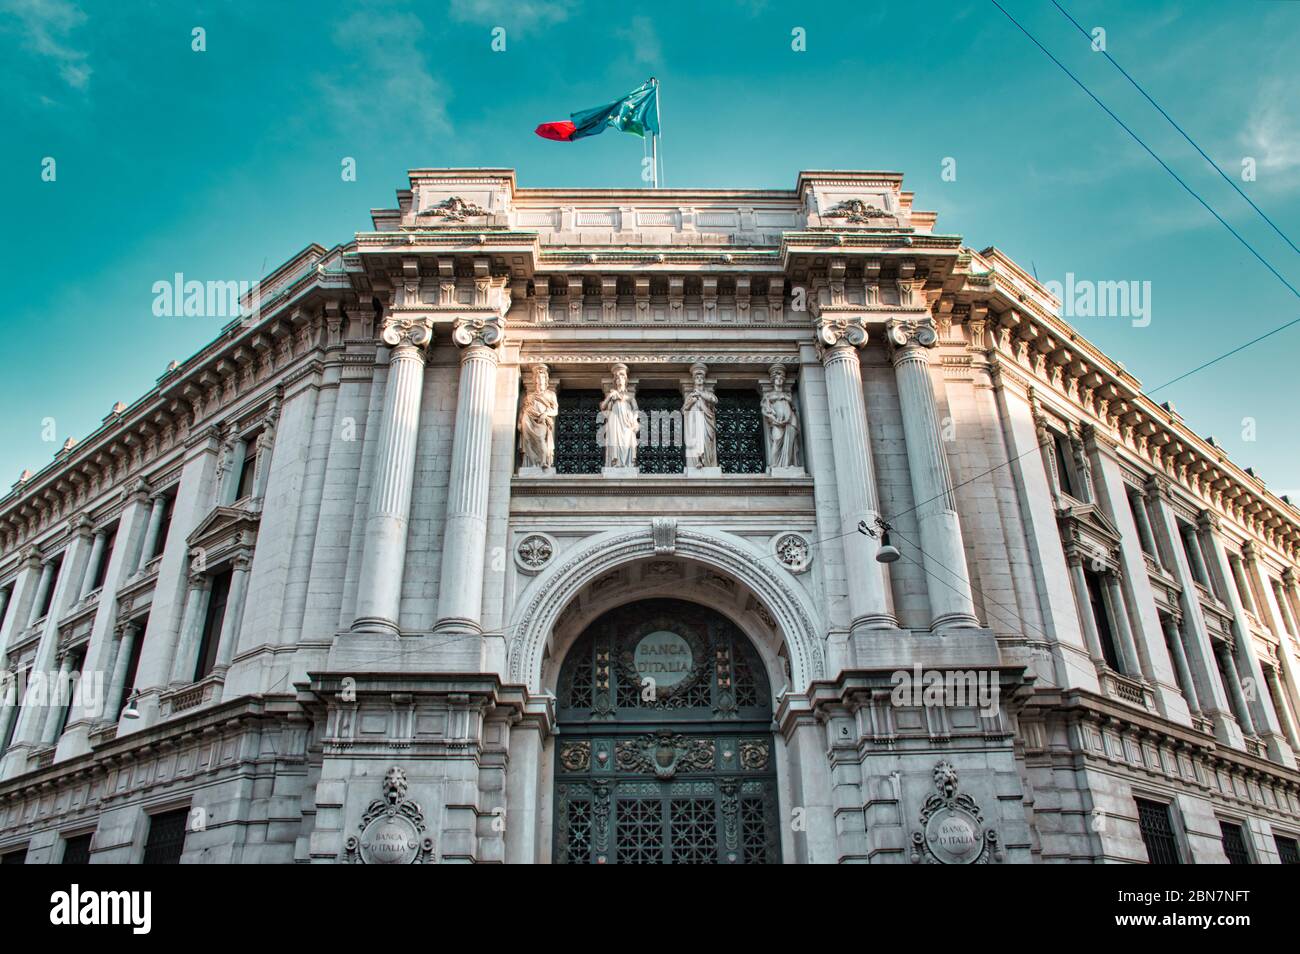 Central Bank Of Italy High Resolution Stock Photography and Images - Alamy